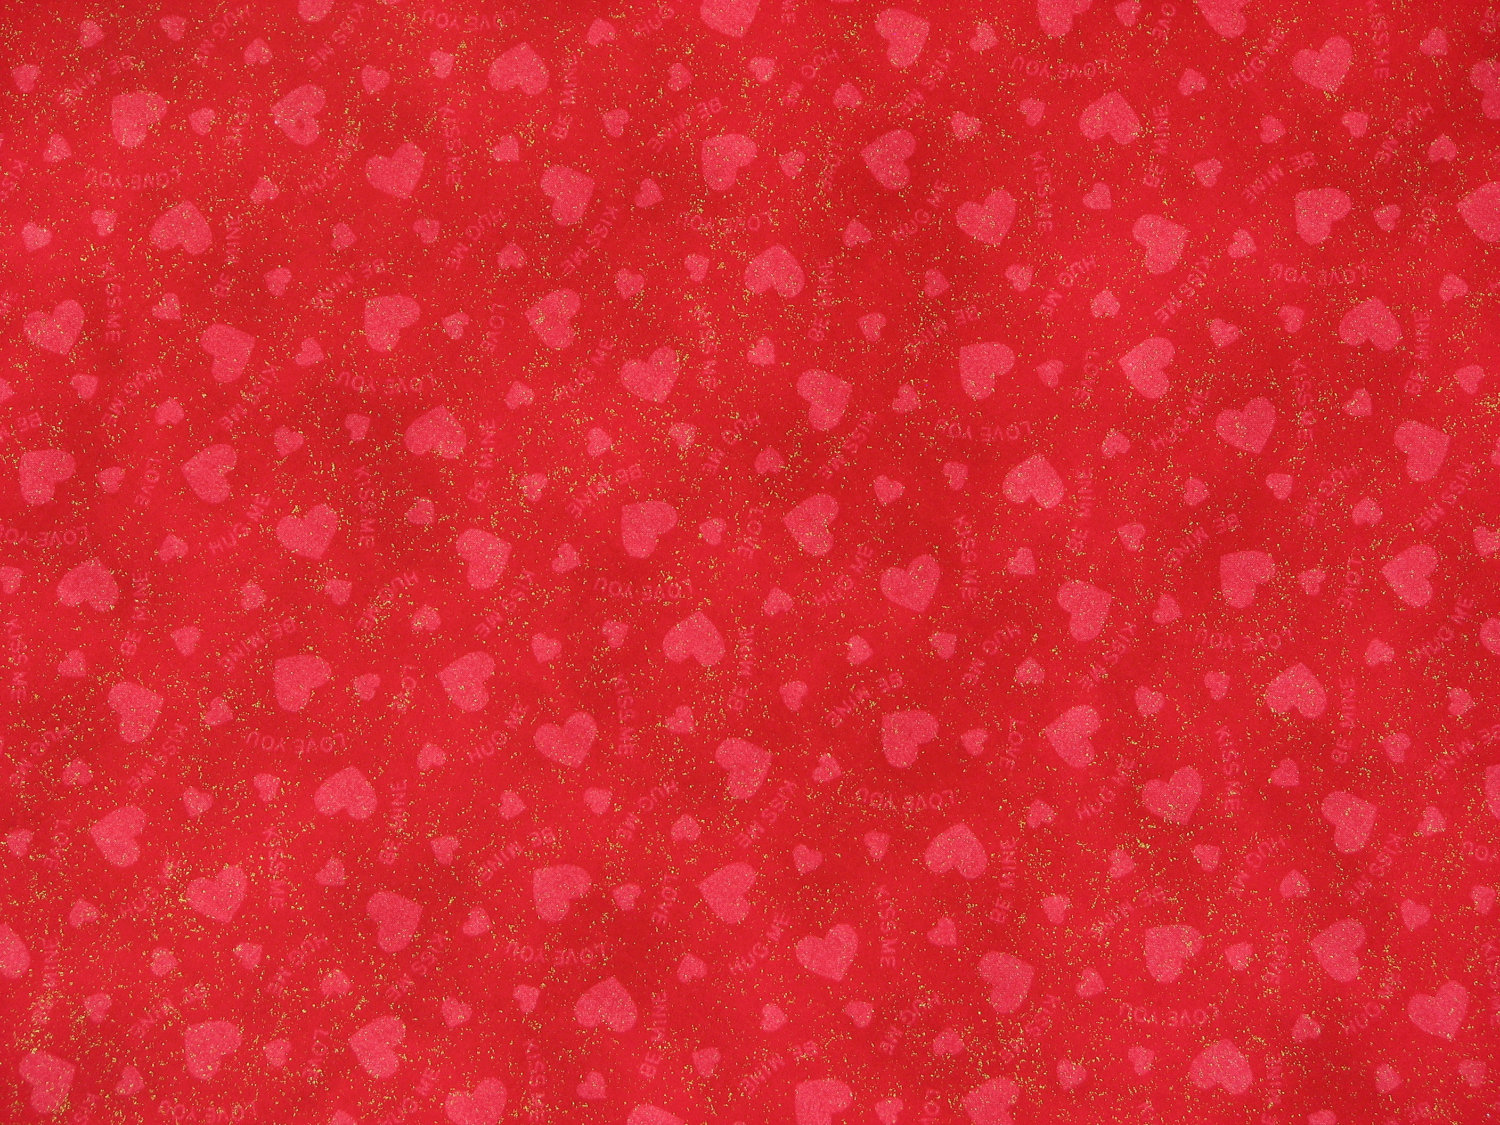 Fabric Valentines Day Red Hearts By Mariascraft